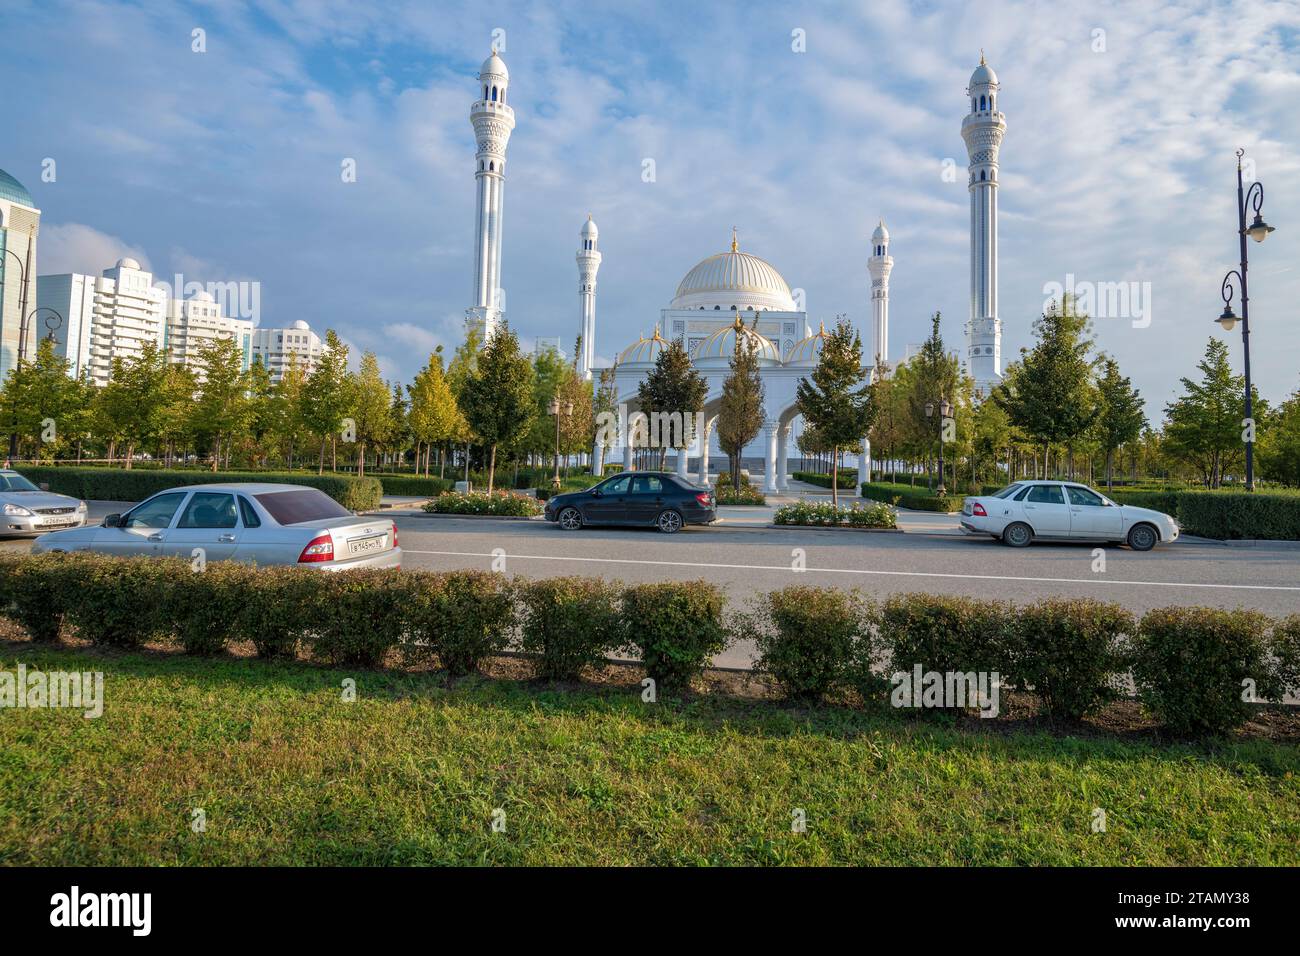 SHALI, RUSSIA - SEPTEMBER 29, 2021: Mosque of the Prophet Muhammad (Pride of Muslims Mosque) in the city landscape on a sunny September morning Stock Photo